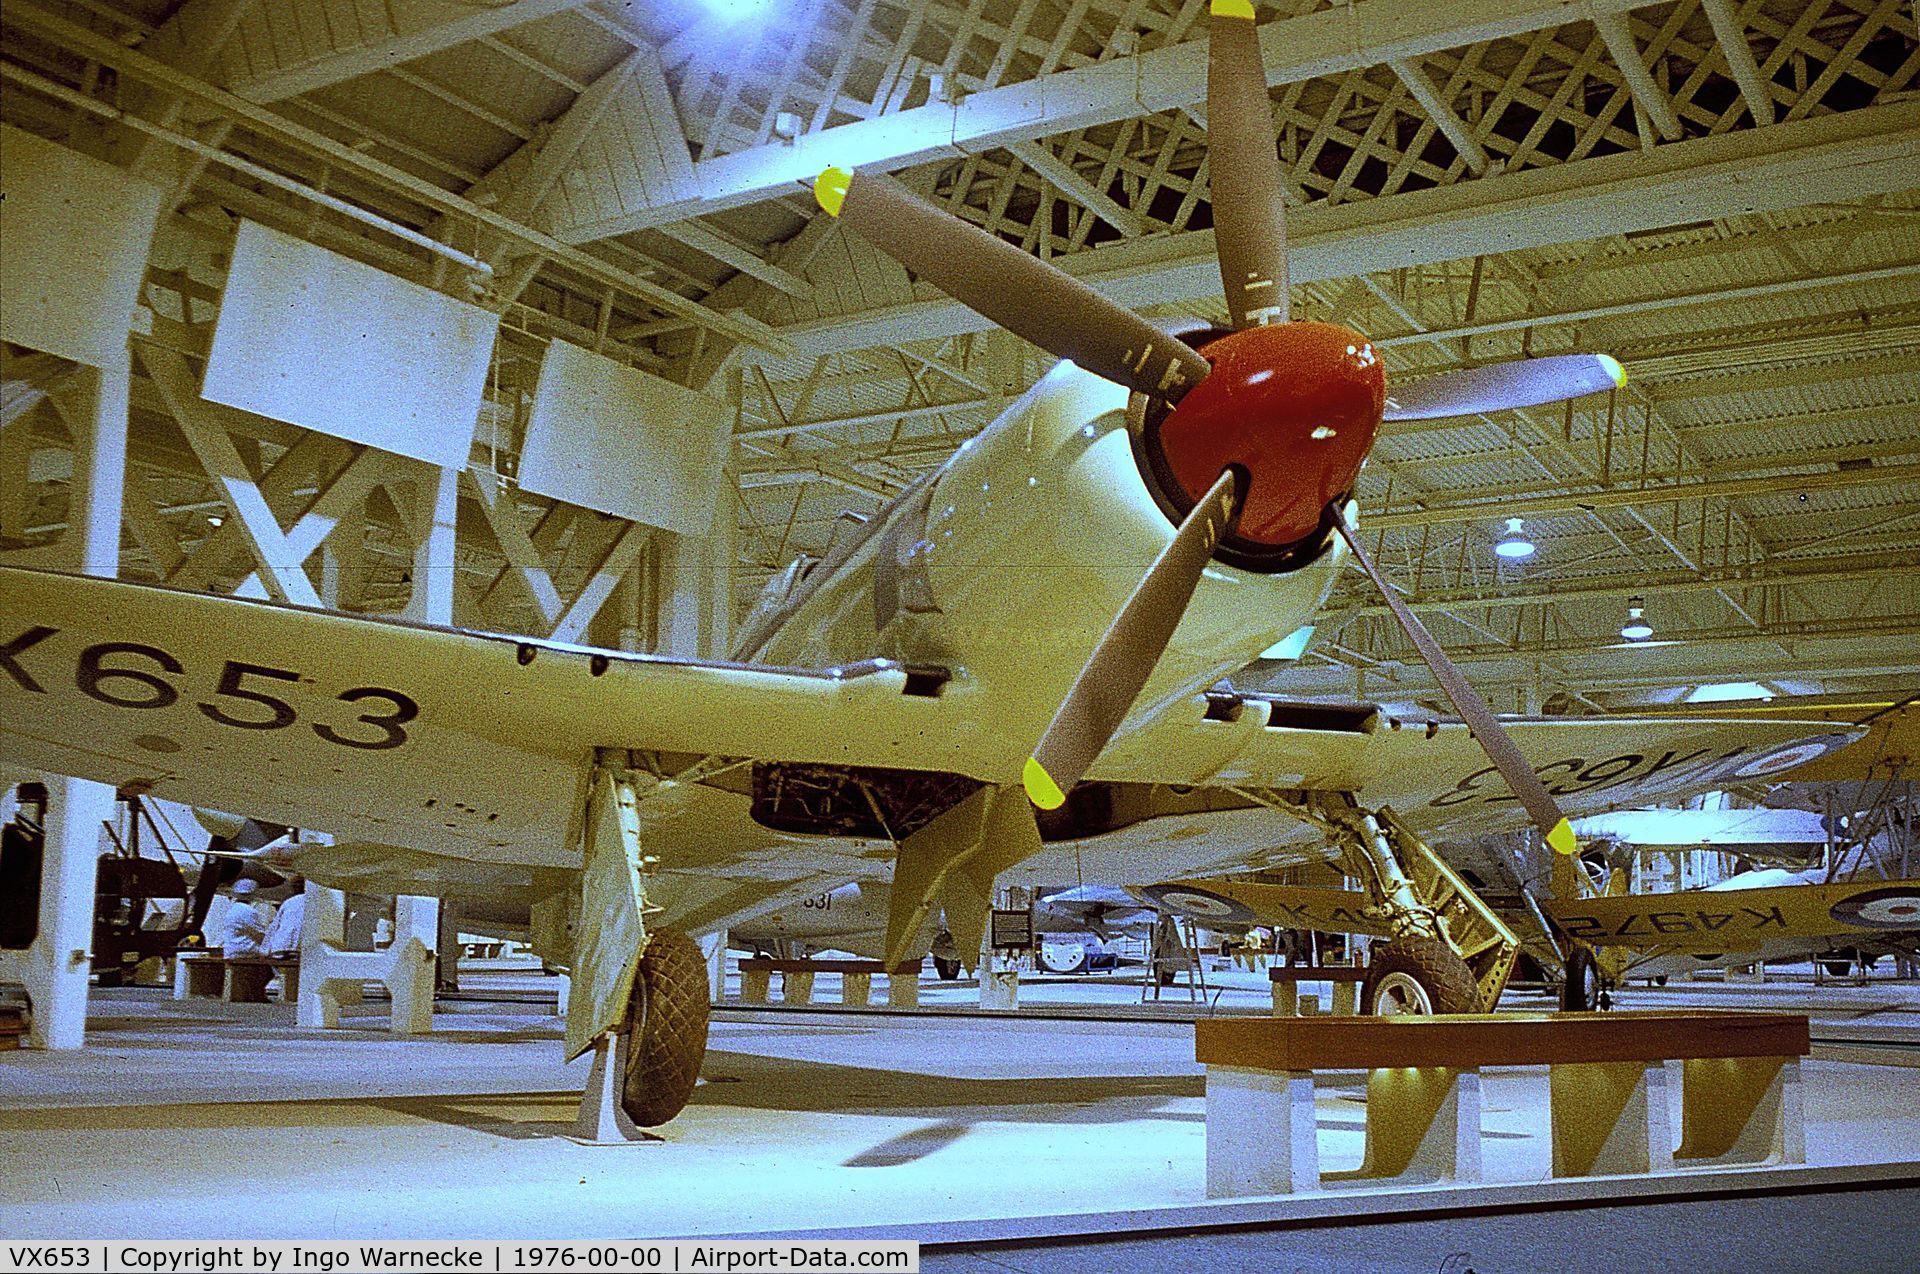 VX653, 1949 Hawker Sea Fury FB.11 C/N Not found G-BUCM/VX653, Hawker Sea Fury FB11 at the Royal Air Force Museum, Hendon during the 'Wings of the Eagle' exhibition 1976